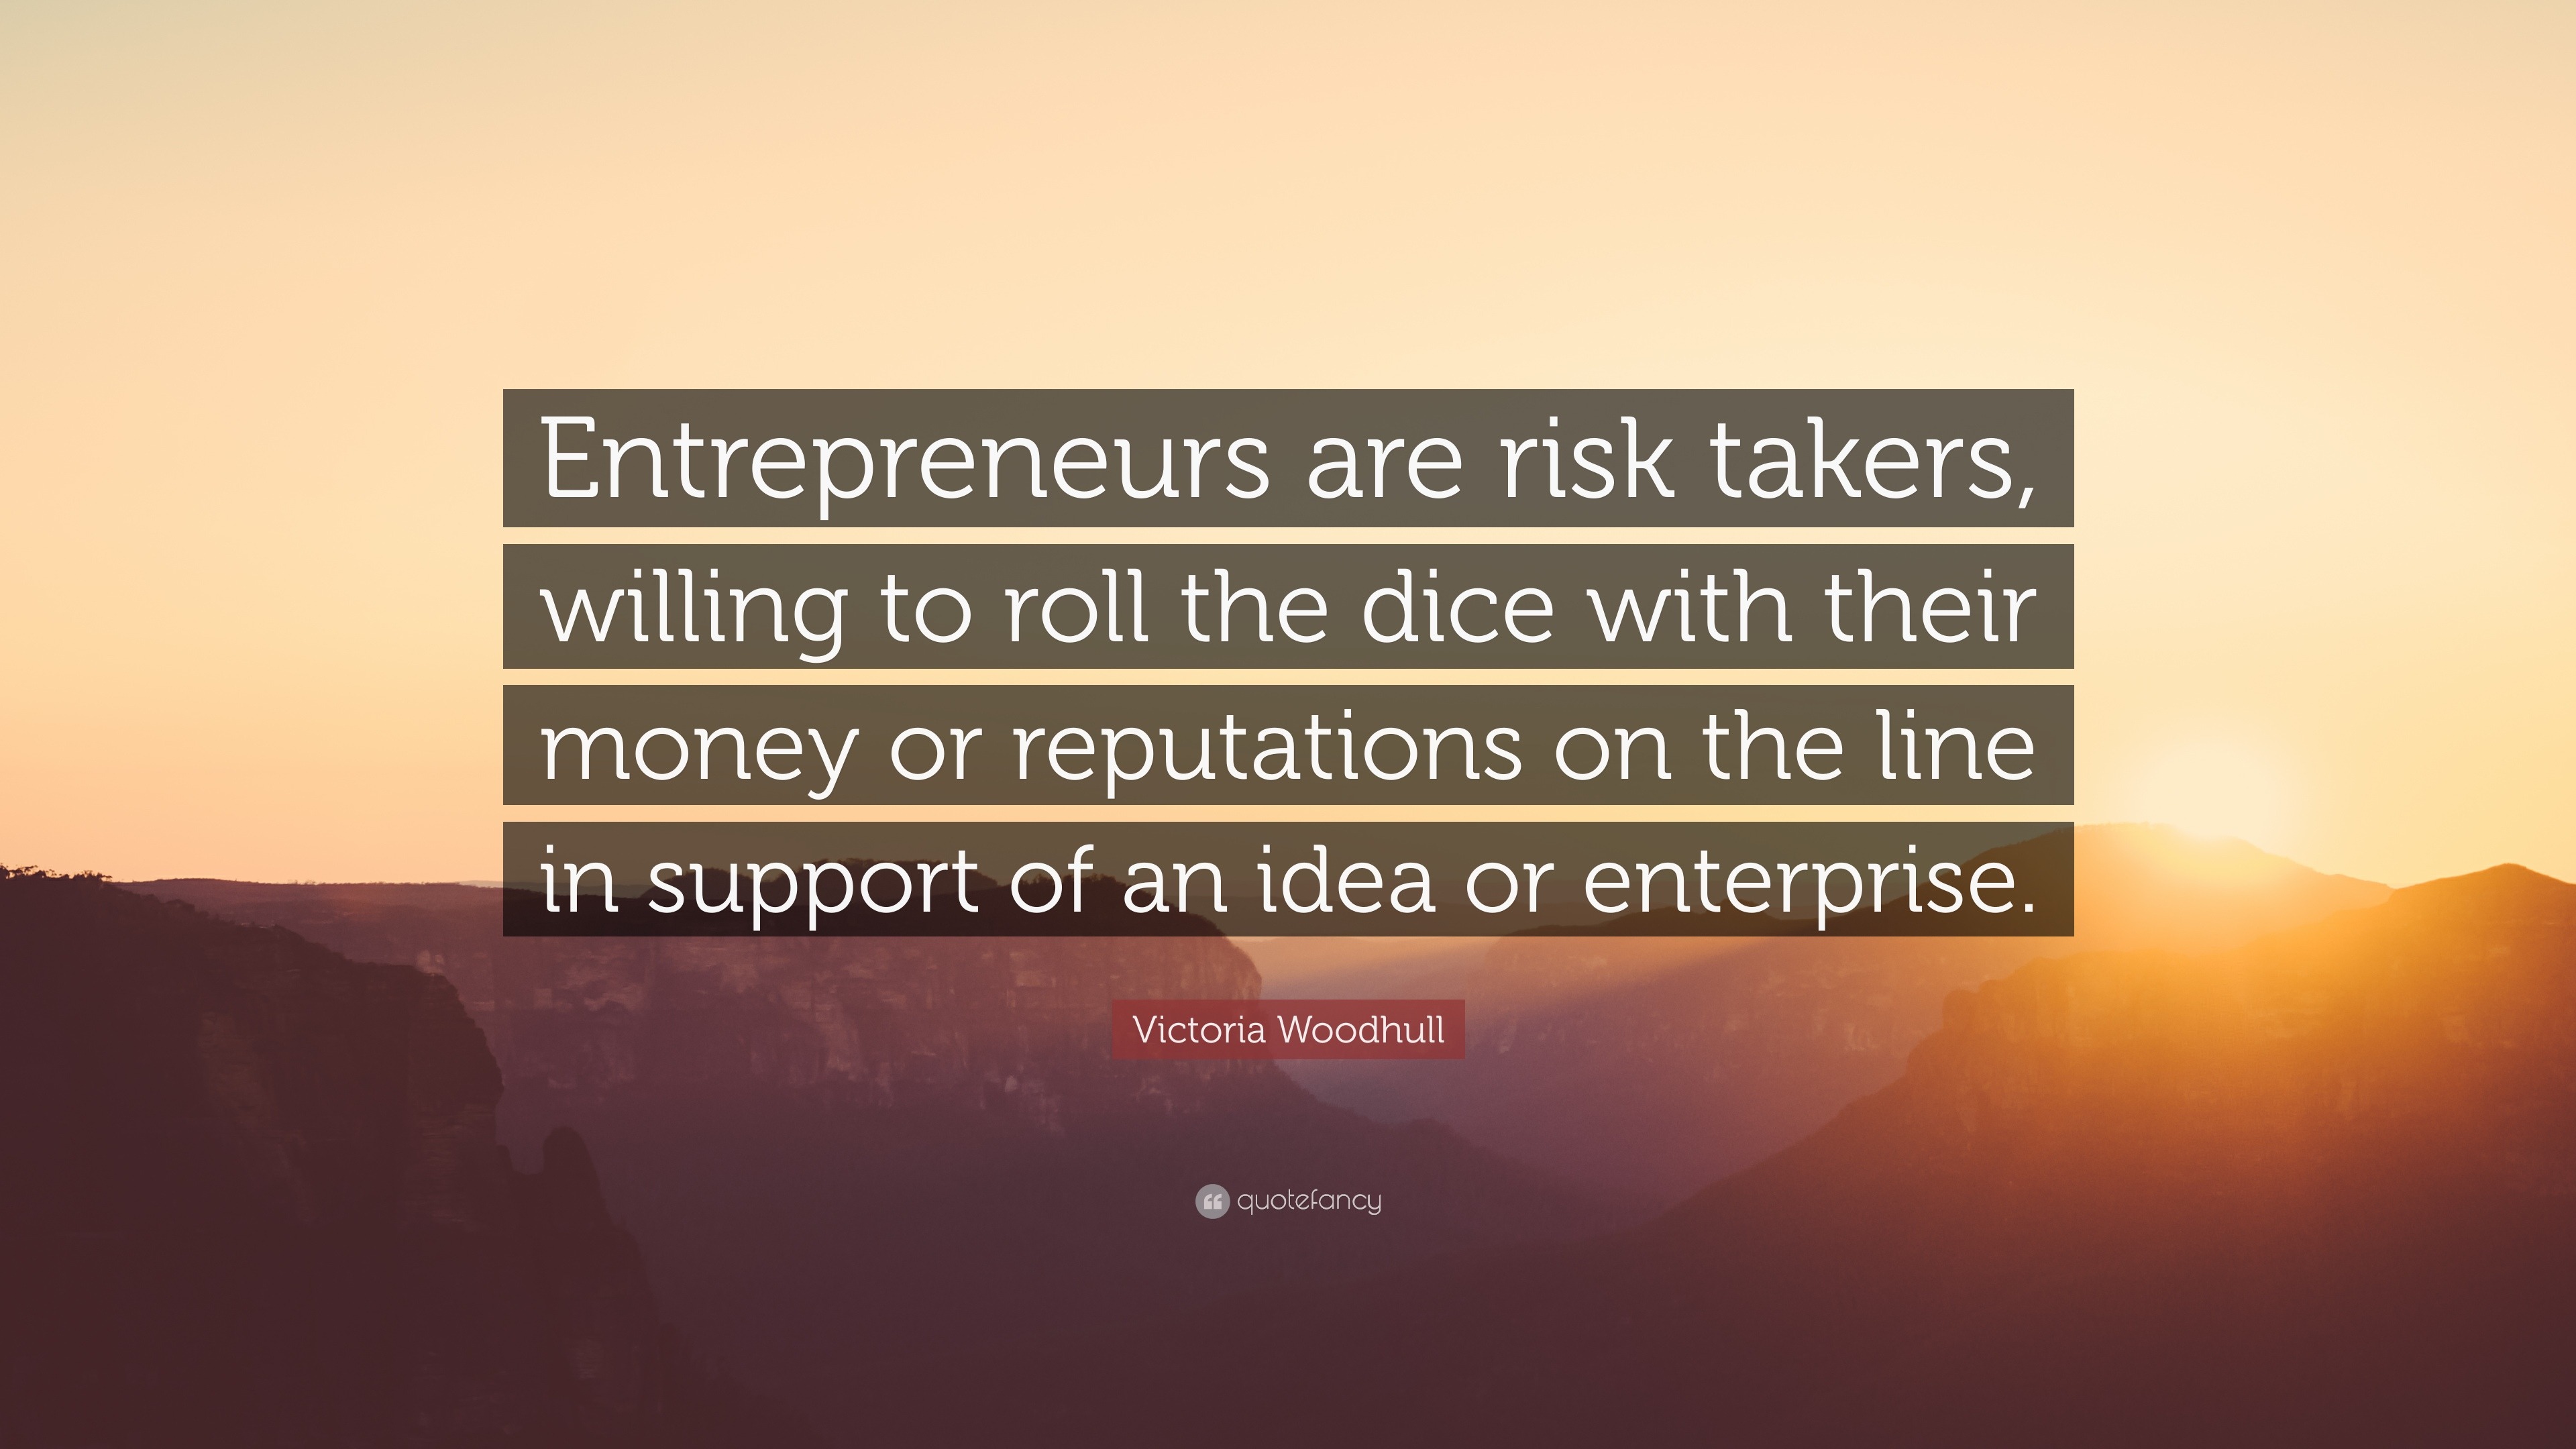 Victoria Woodhull Quote: “Entrepreneurs are risk takers, willing to